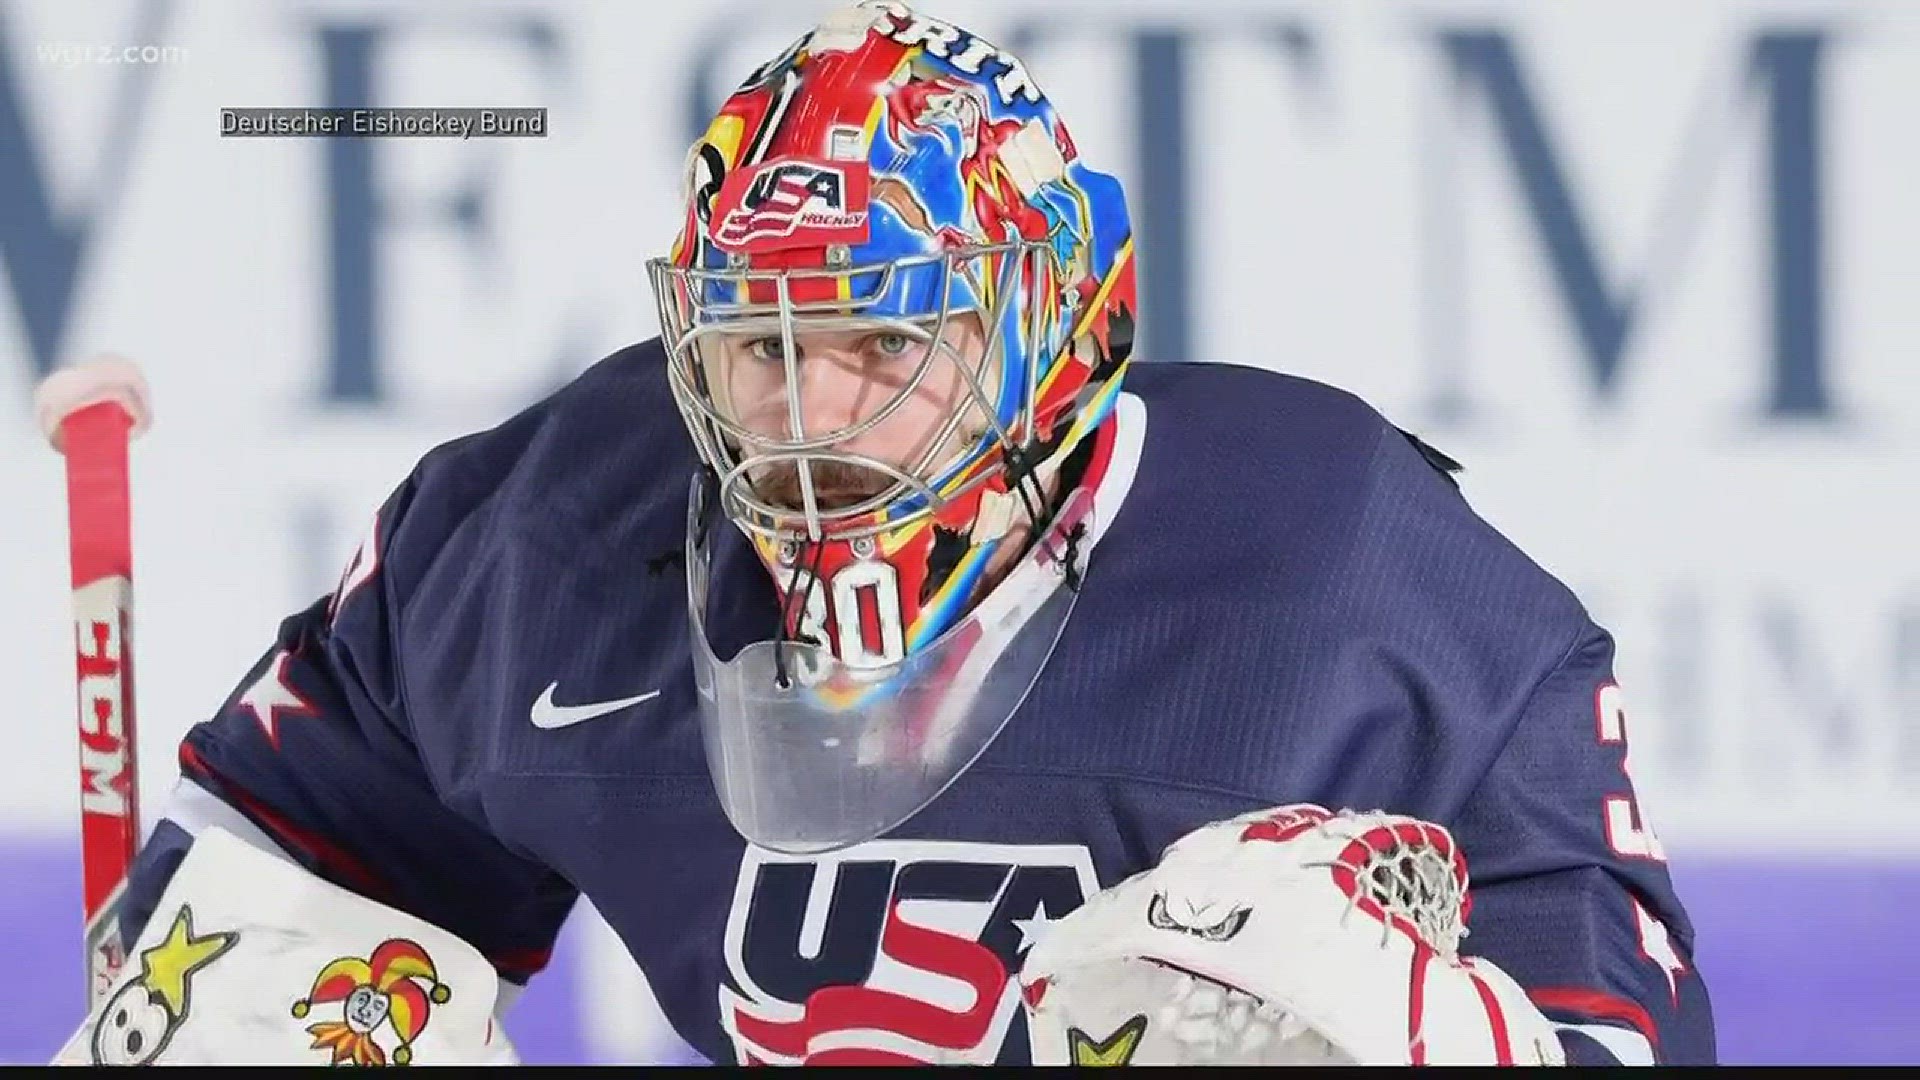 Erie Goalie Hopes To Help Team USA To Gold